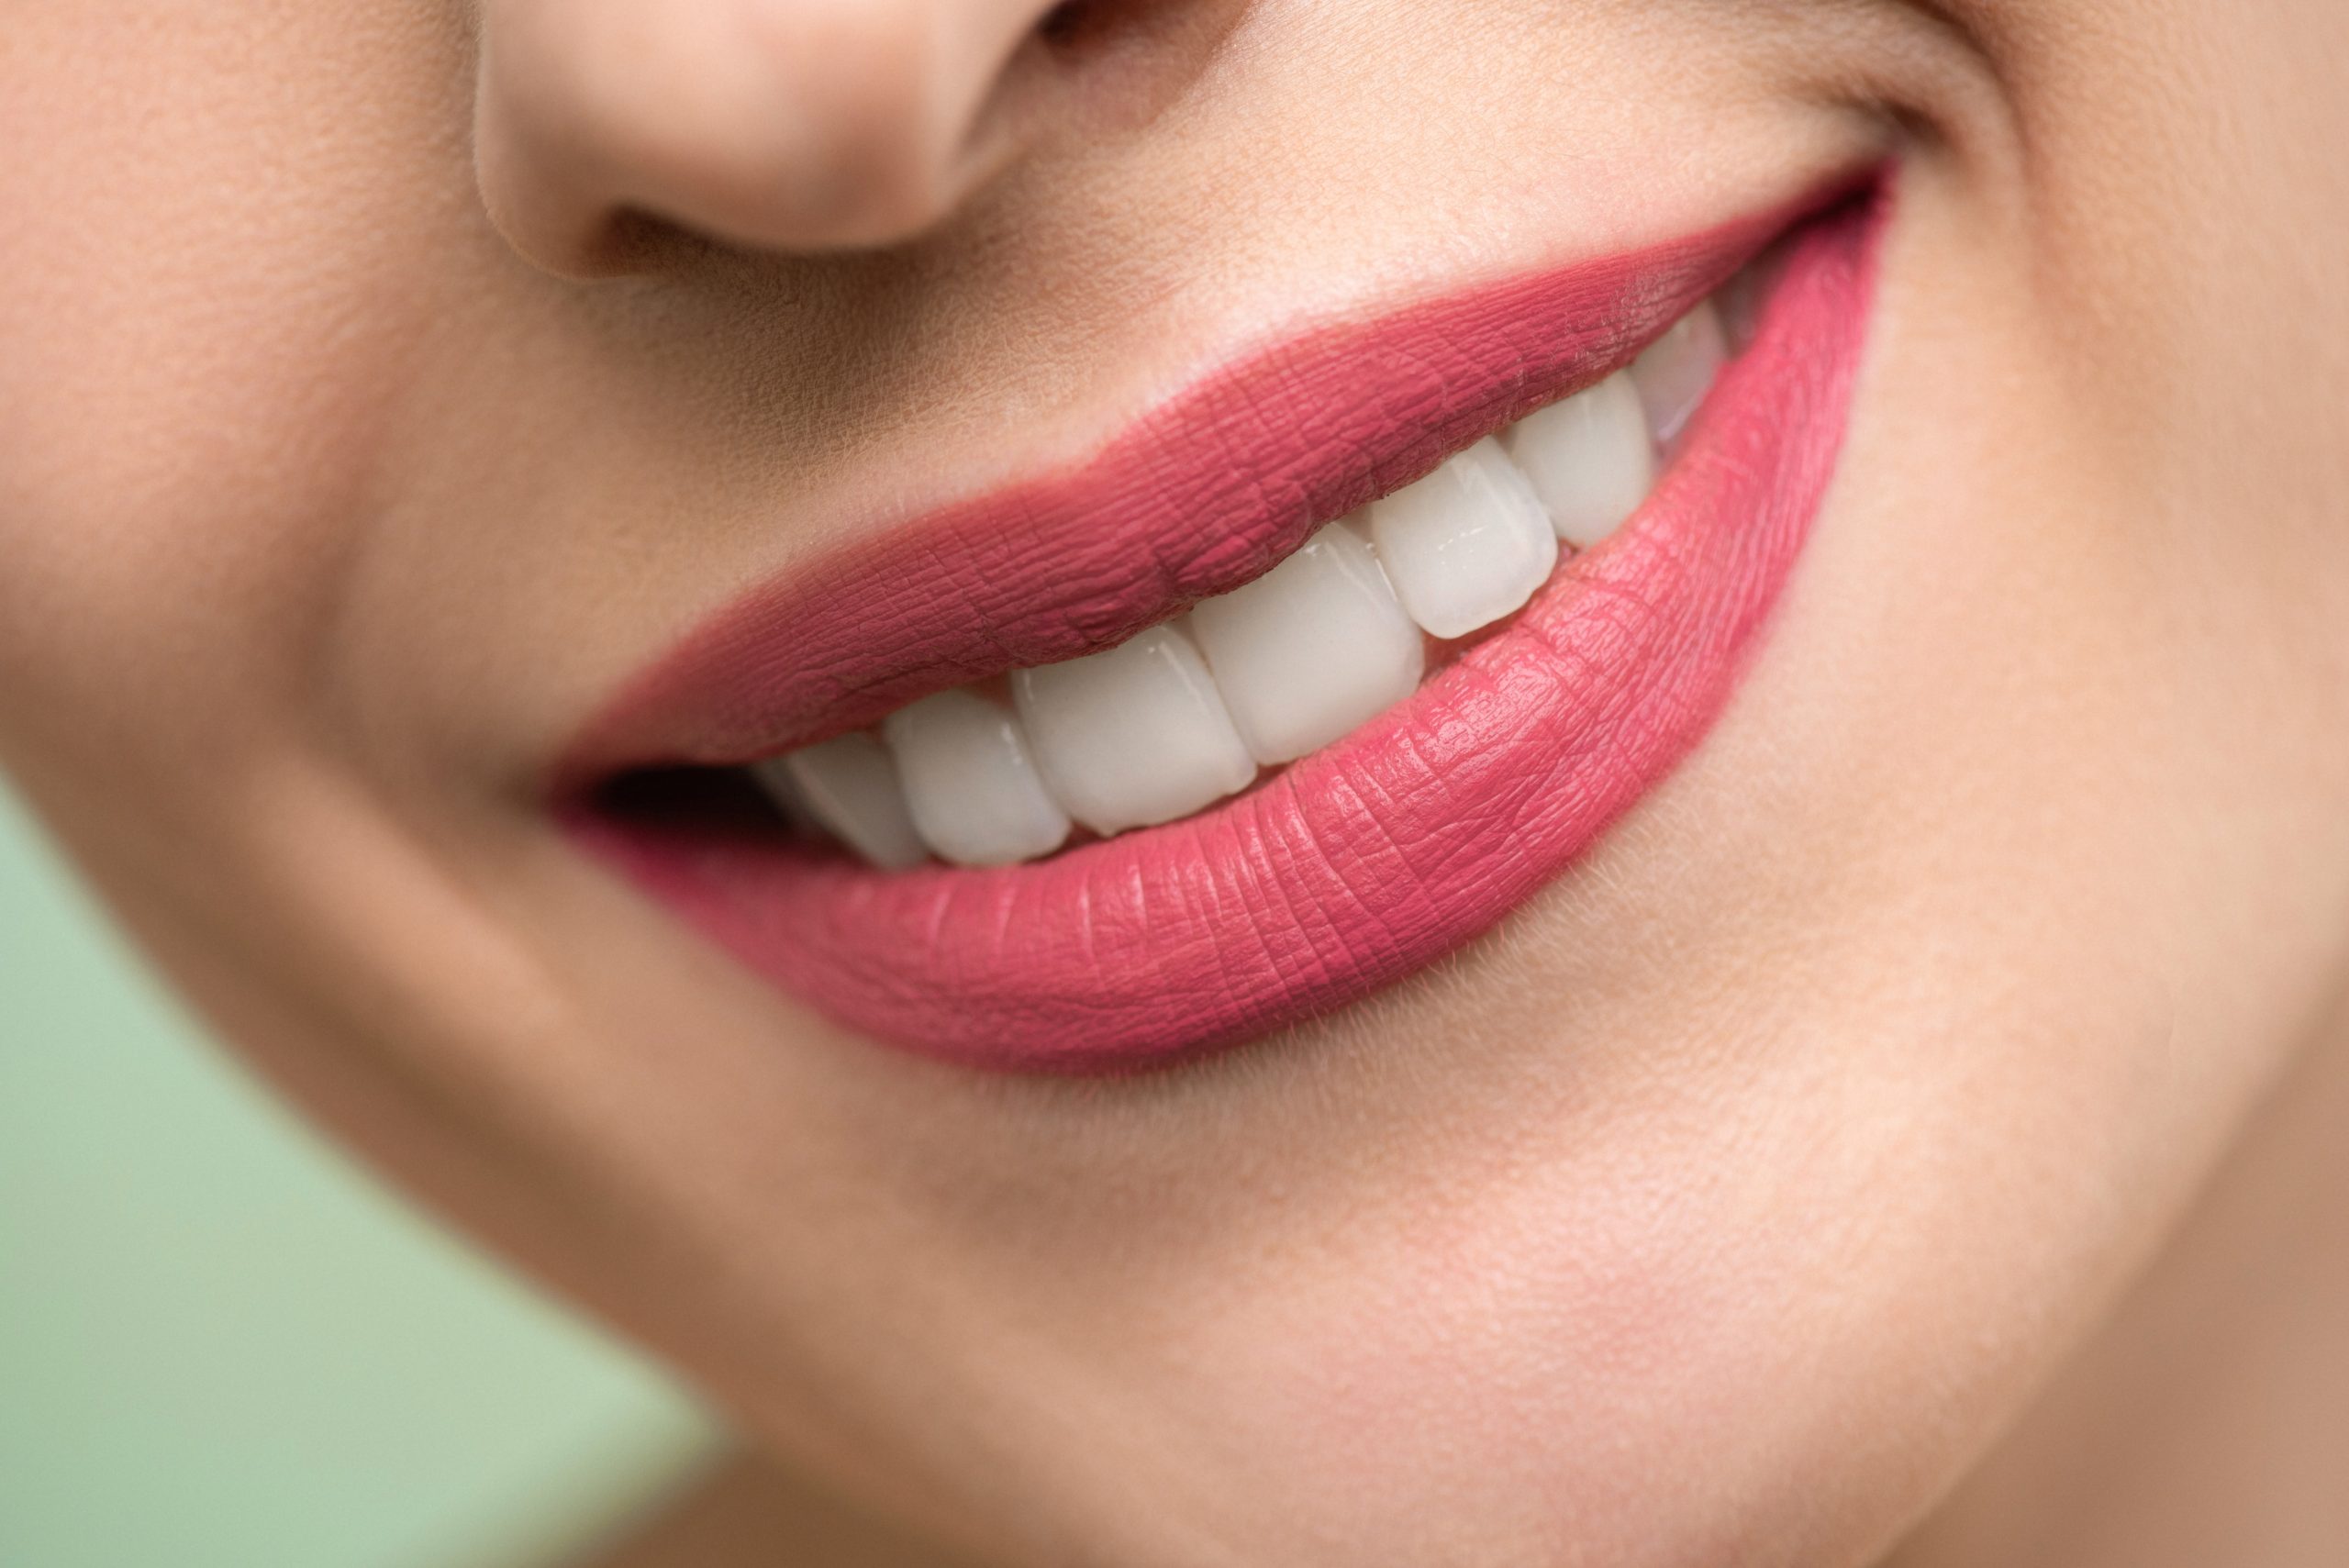 Is Teeth Whitening Covered by Insurance?